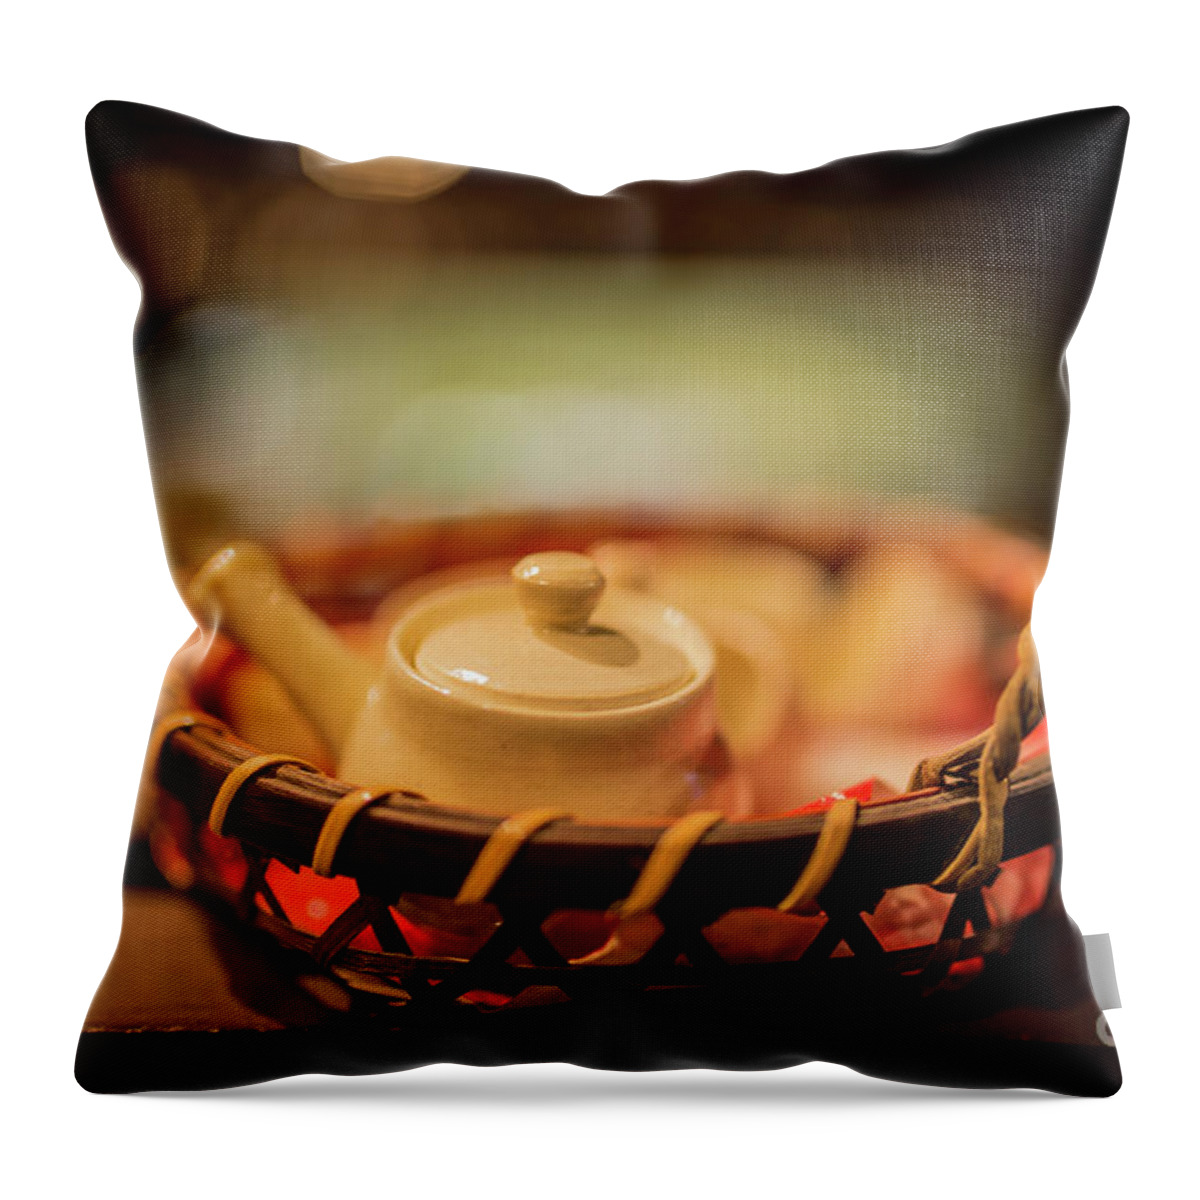 Still Life Throw Pillow featuring the photograph Bokeh by Eva Lechner